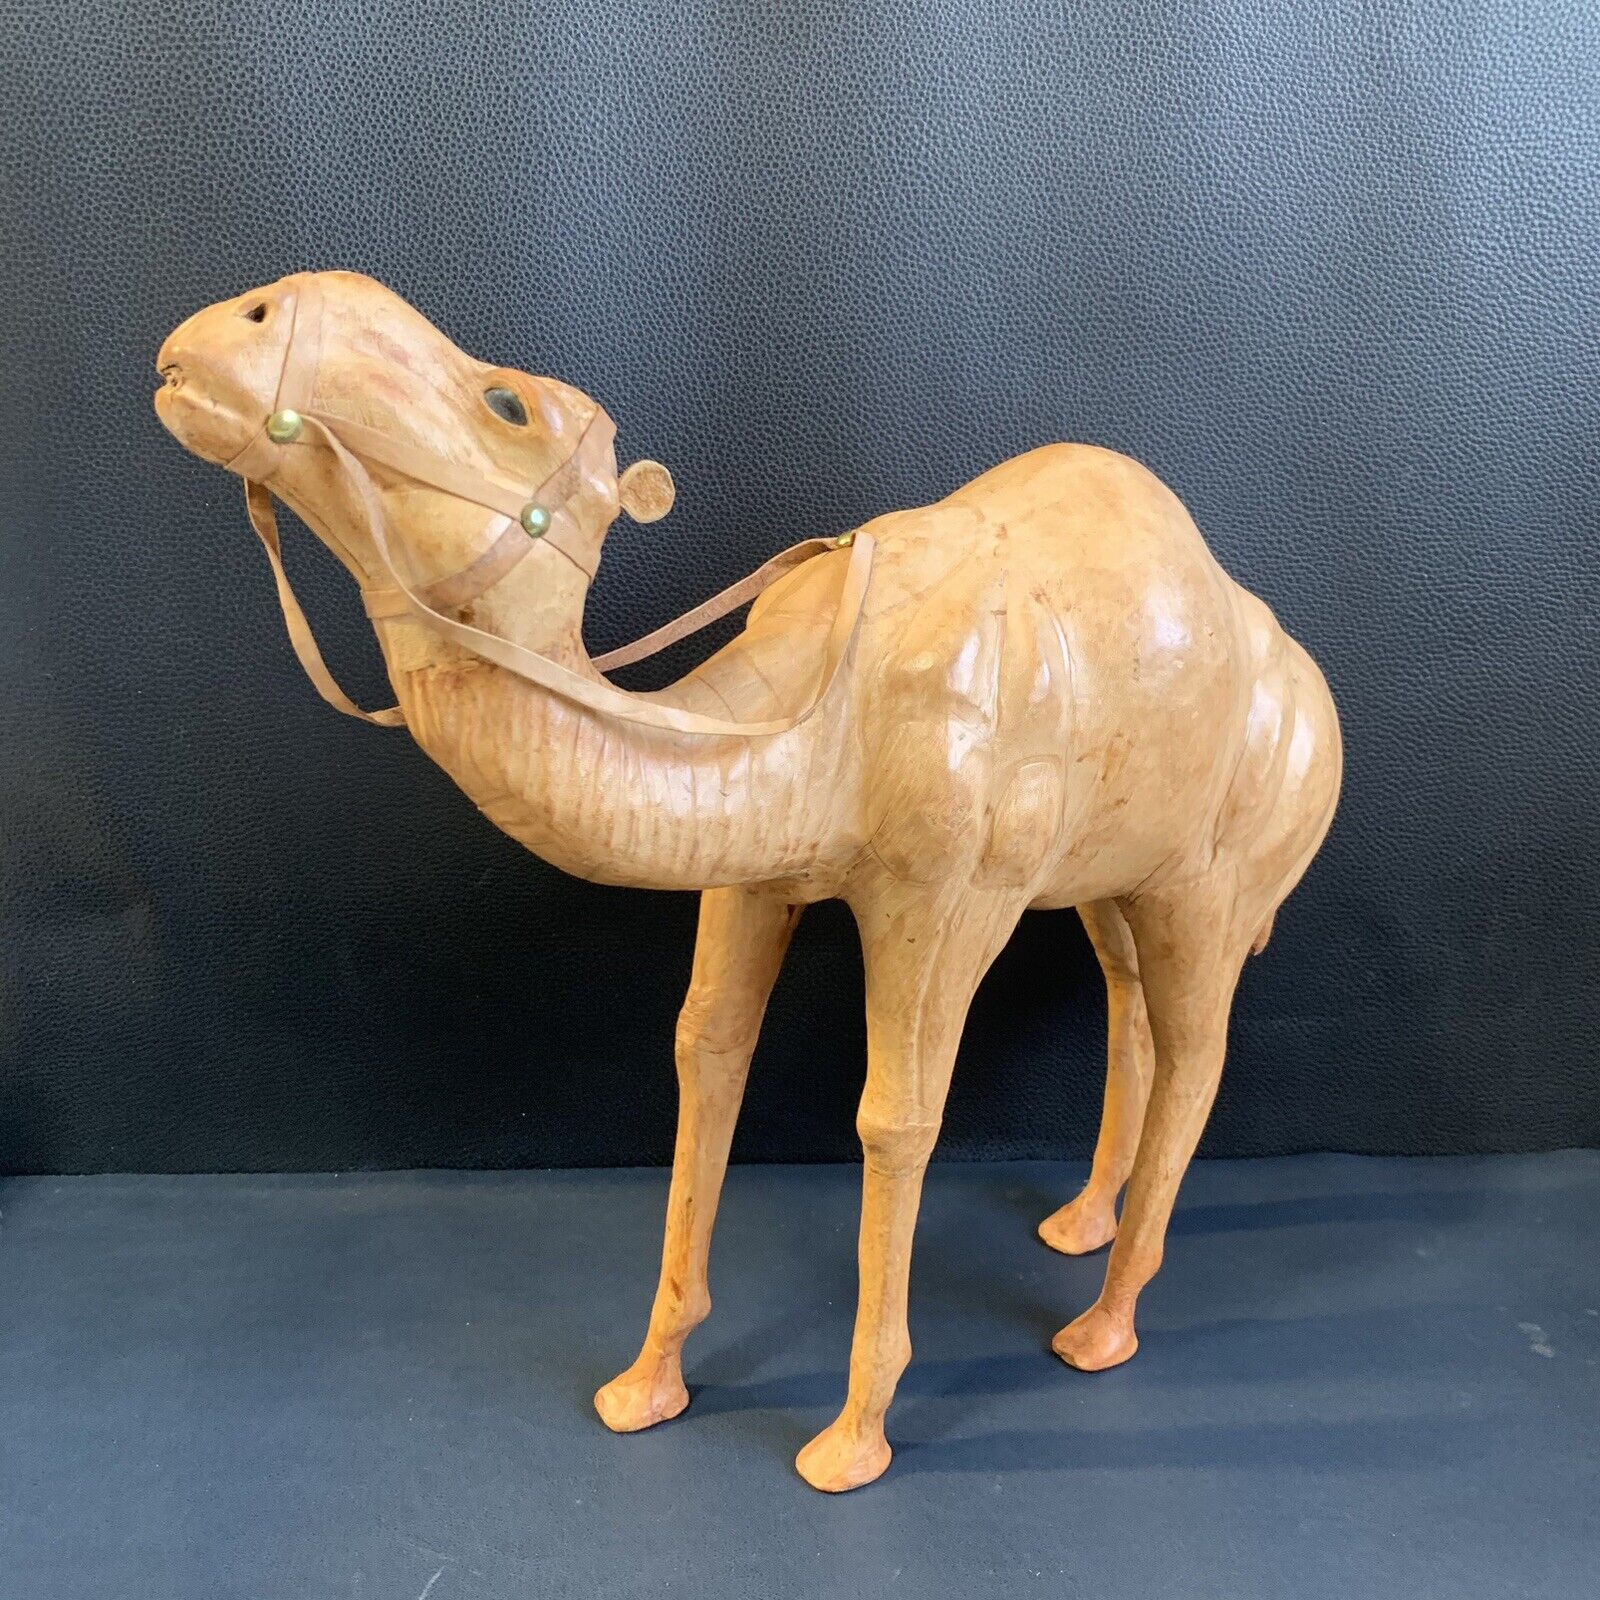 Leather Camel Statue Figure 14” Hand Made, Glass Eyes, Molded Leather Nativity